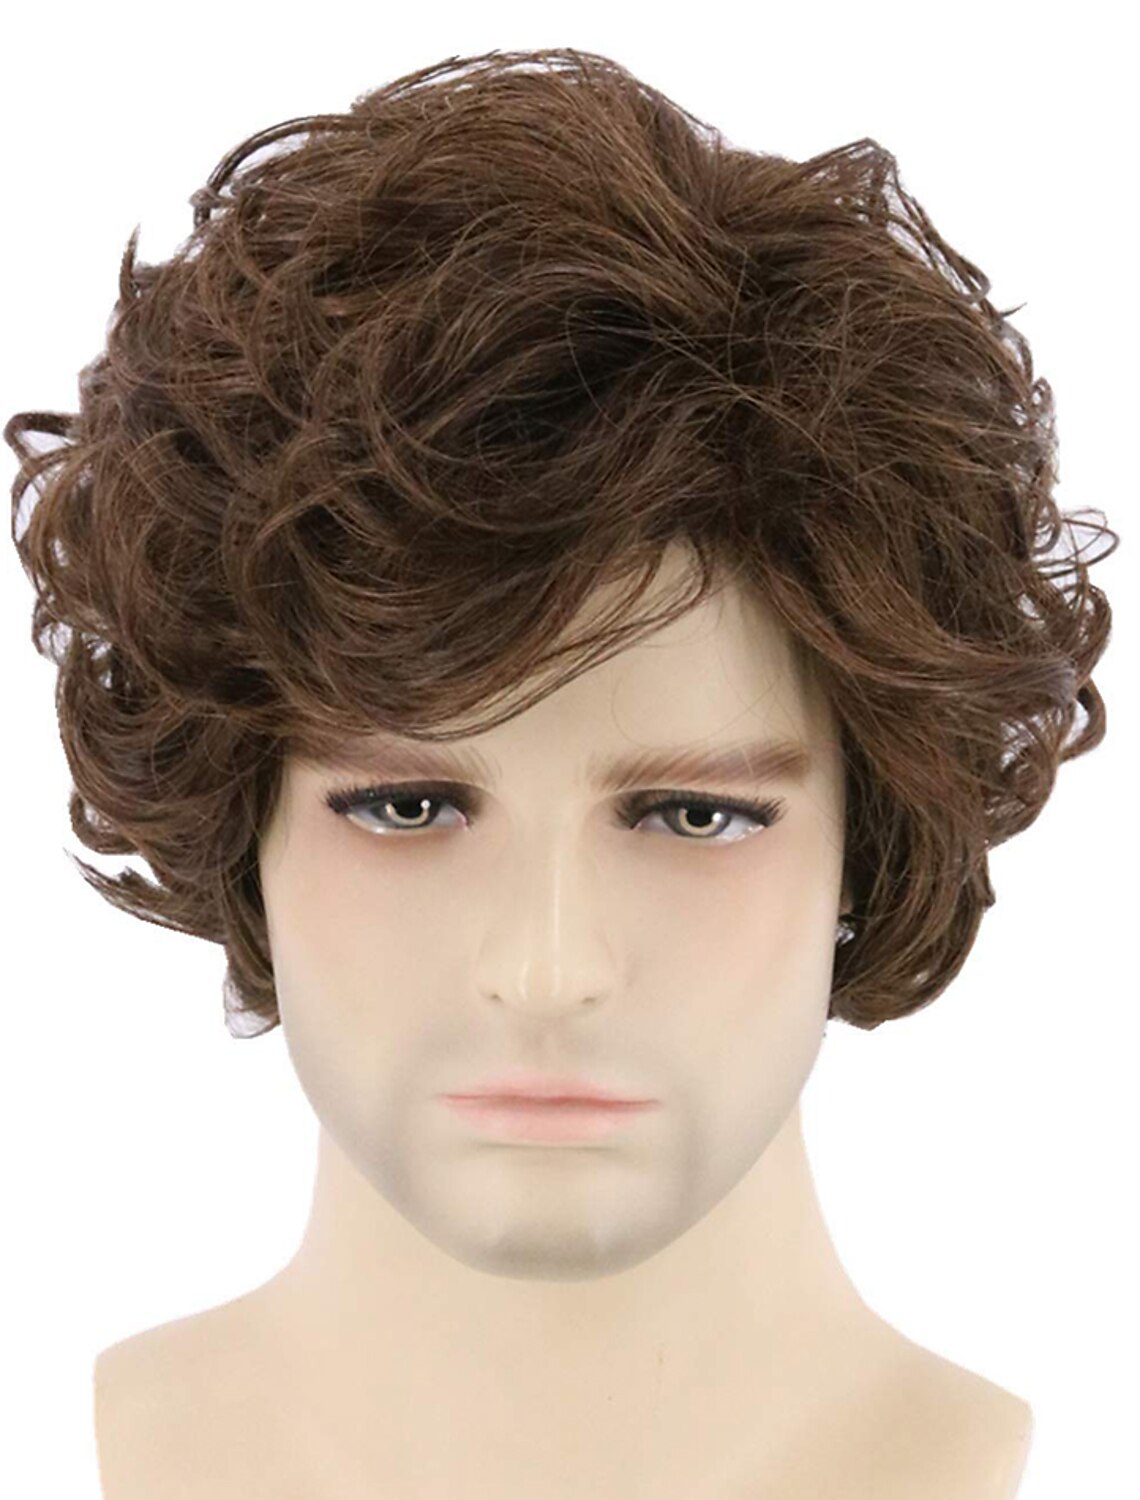 Synthetic Wig Curly Side Part Wig Short Light Brown Dark Brown Black  Synthetic Hair Men's Cosplay Party Fashion Black Dark Brown 8631313 2023 –  $